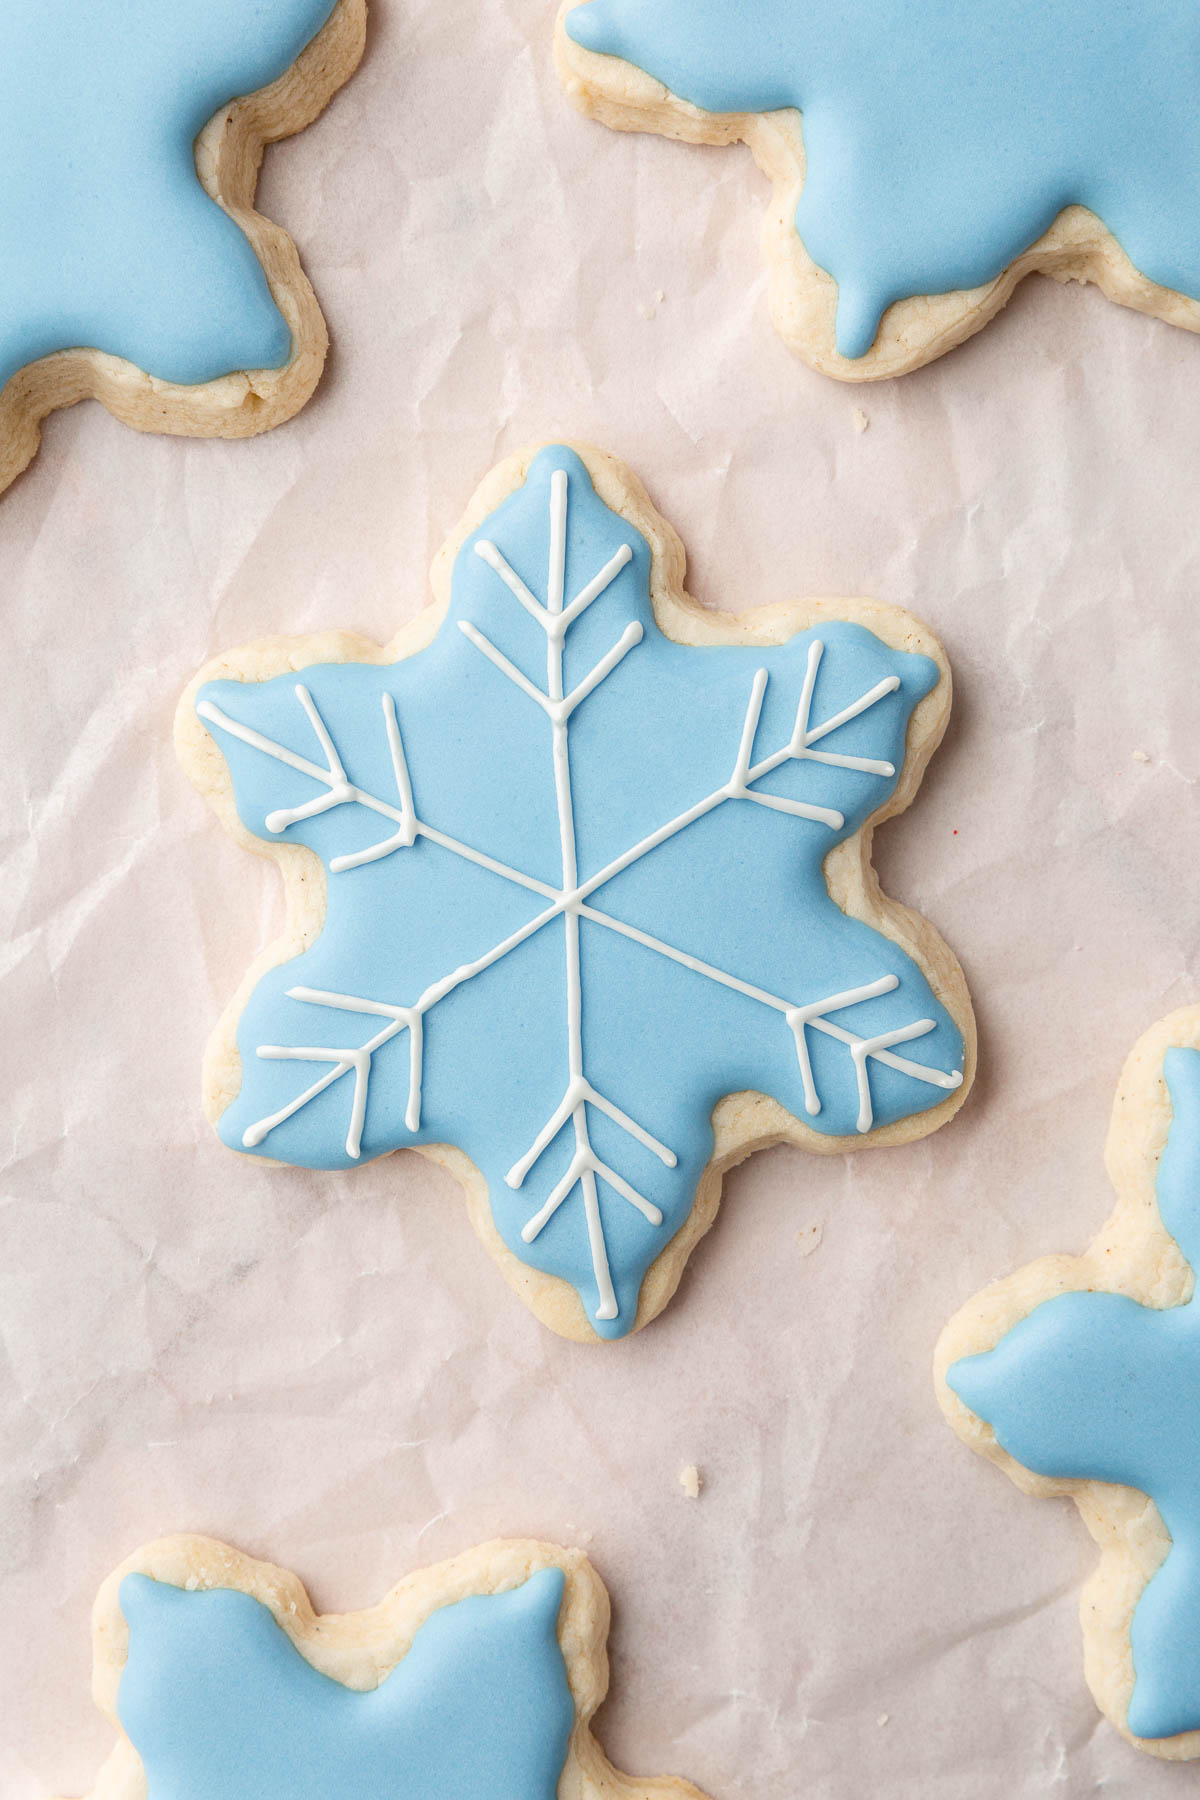 A few gluten-free snowflake sugar cookies decorated with blue royal icing with one having white royal icing details on top.